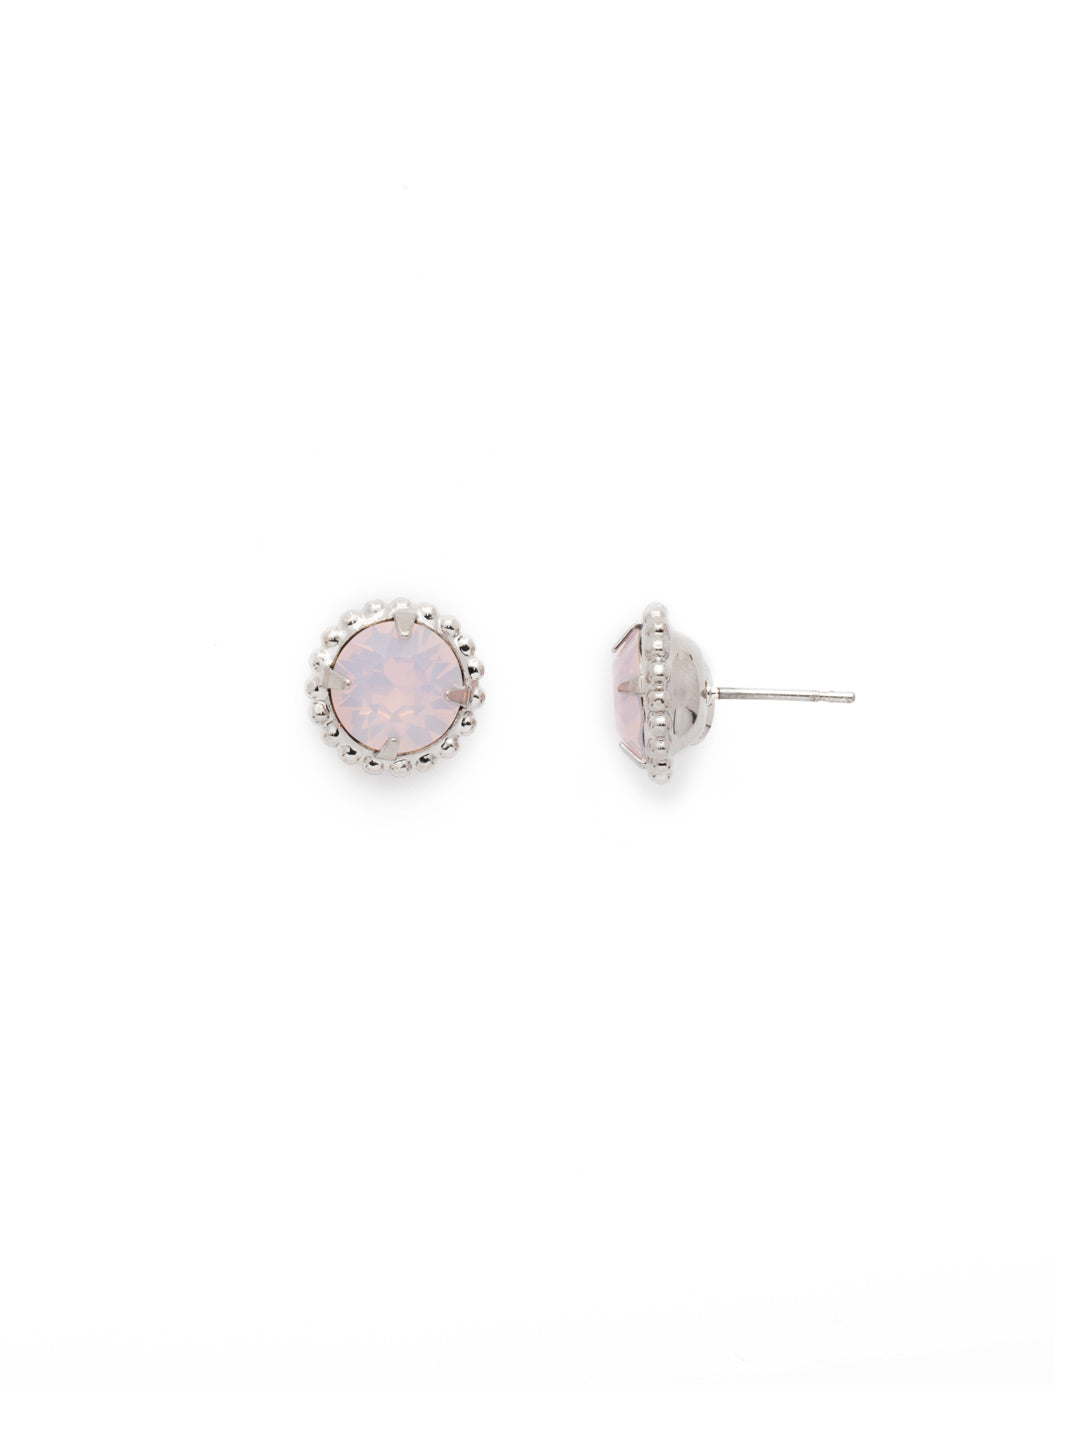 Simplicity Stud Earrings - EBY38RHROW - <p>A timeless classic, the Simplicity Stud Earrings feature round cut crystals in a variety of colors; accented with a halo of metal beaded detail. Need help picking a stud? <a href="https://www.sorrelli.com/blogs/sisterhood/round-stud-earrings-101-a-rundown-of-sizes-styles-and-sparkle">Check out our size guide!</a> From Sorrelli's Rose Water collection in our Palladium Silver-tone finish.</p>